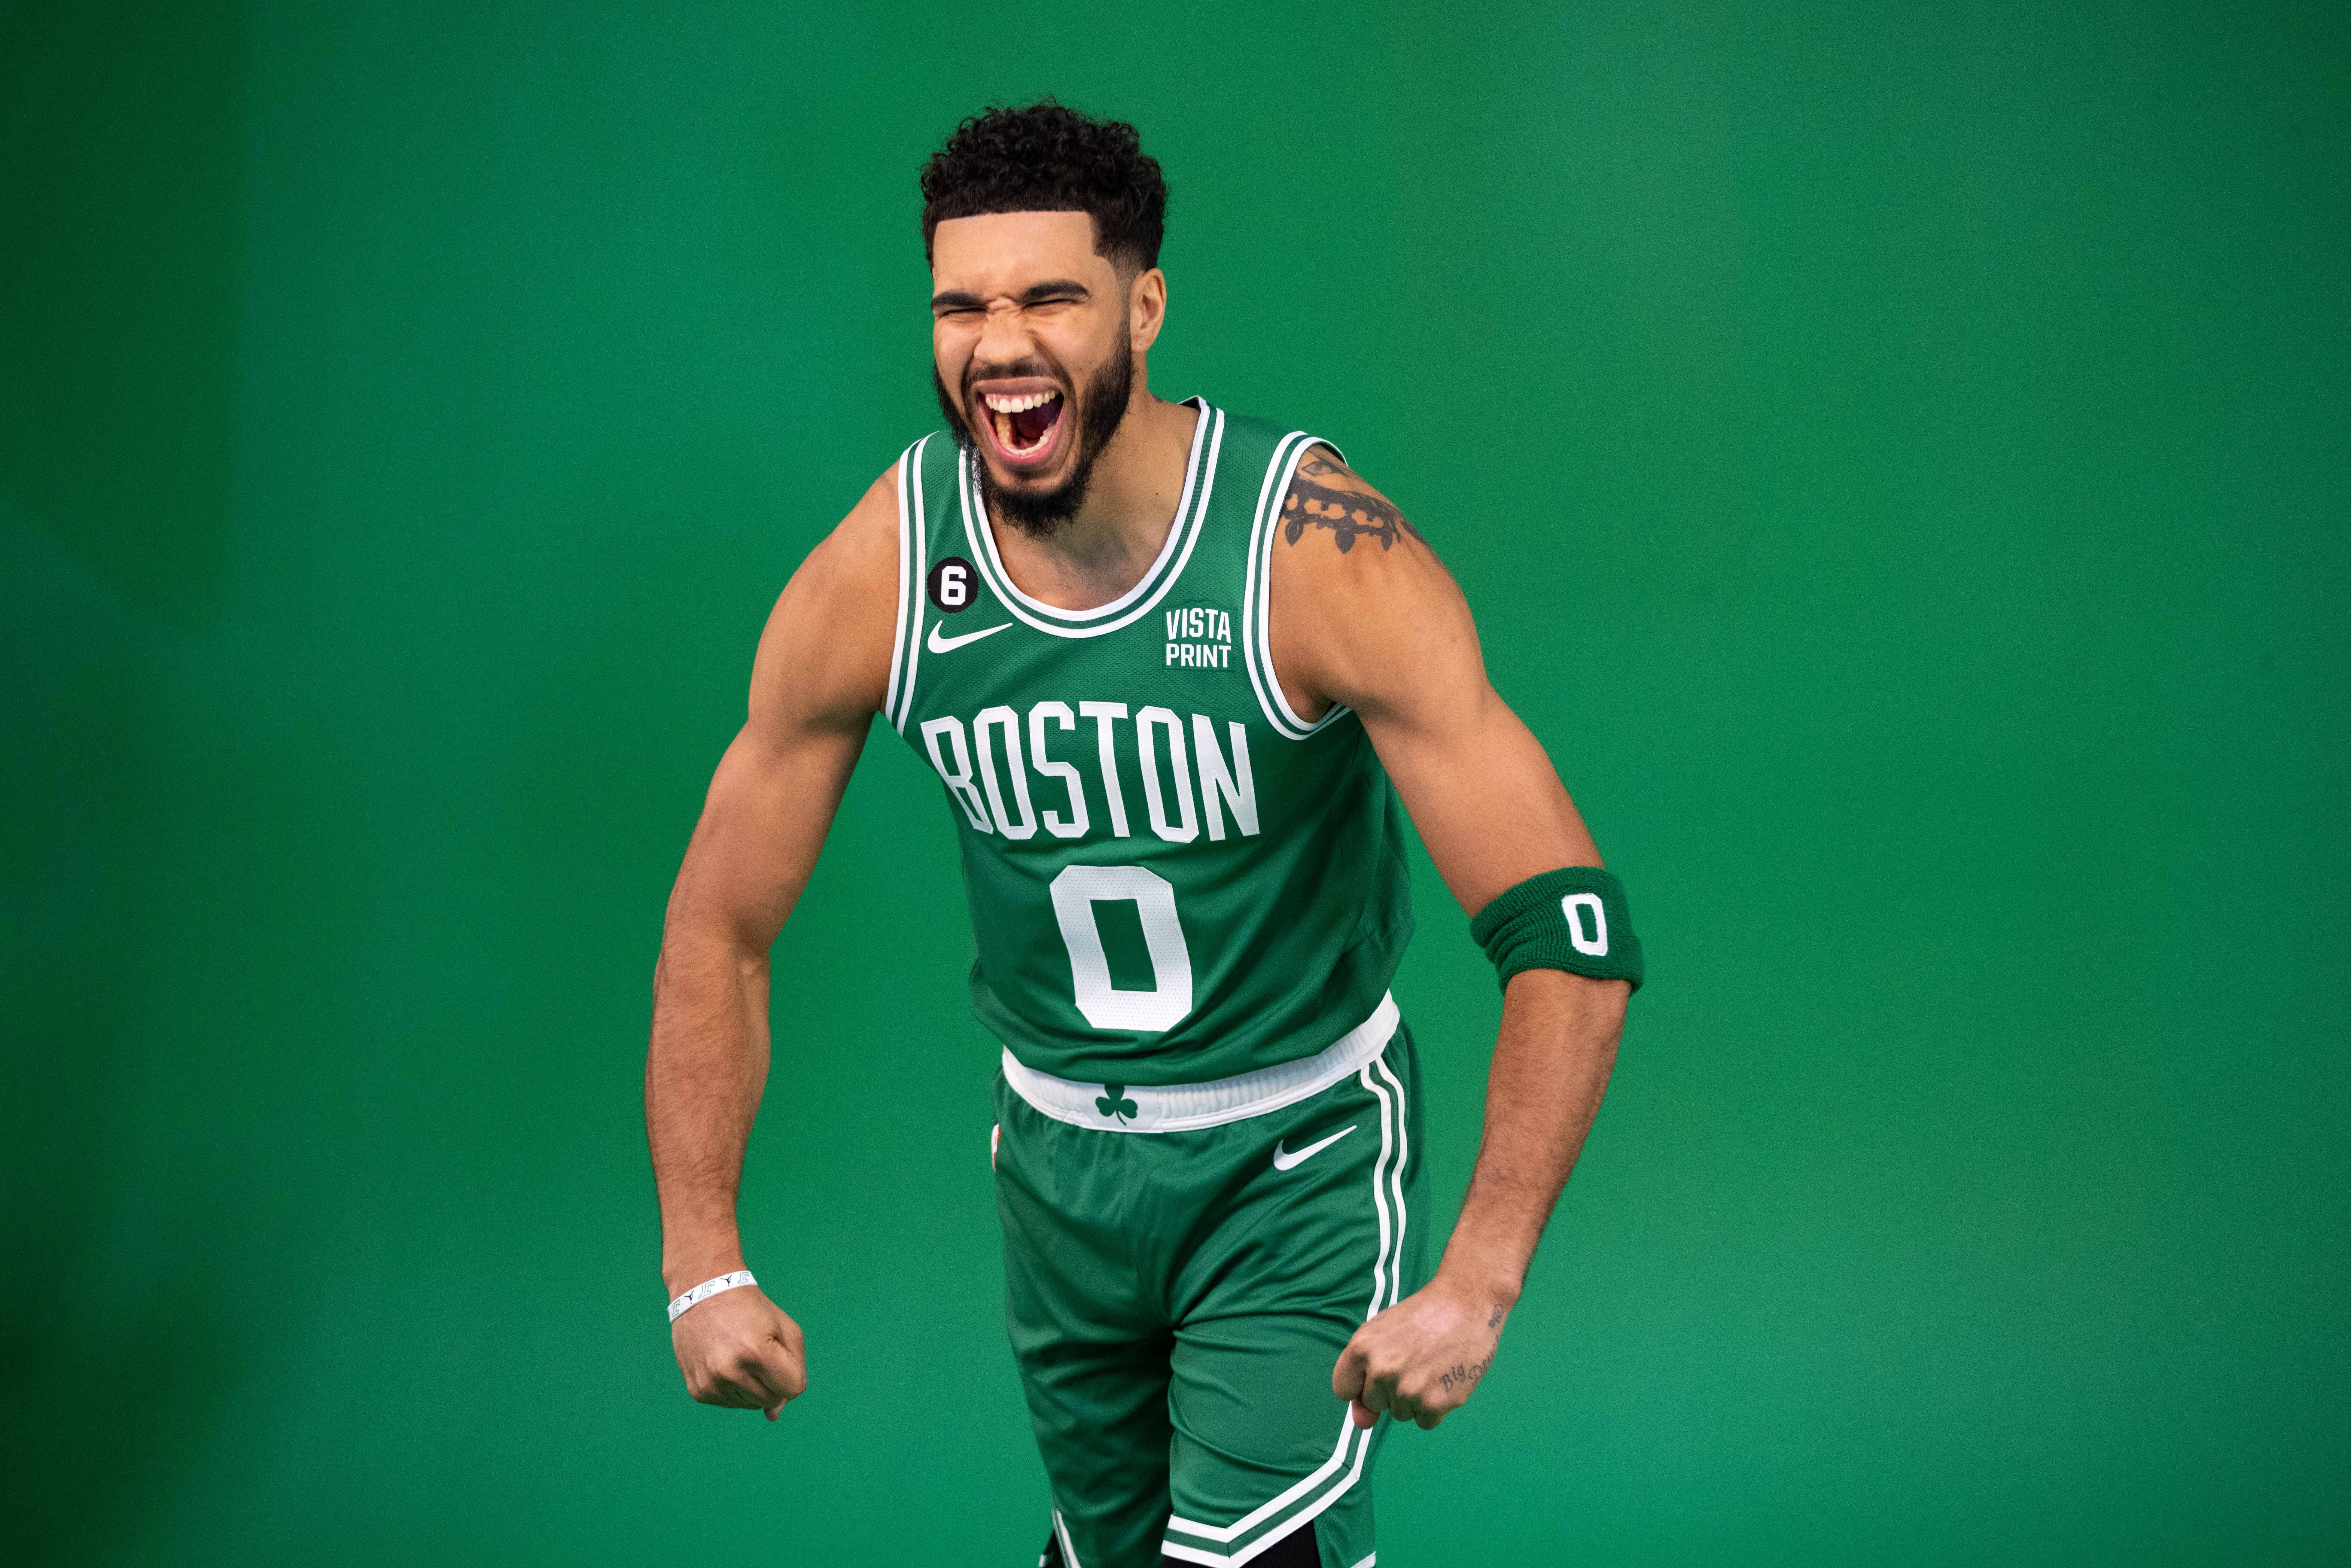 What NBA star did Boston Celtics star Jayson Tatum say he wants to play with?